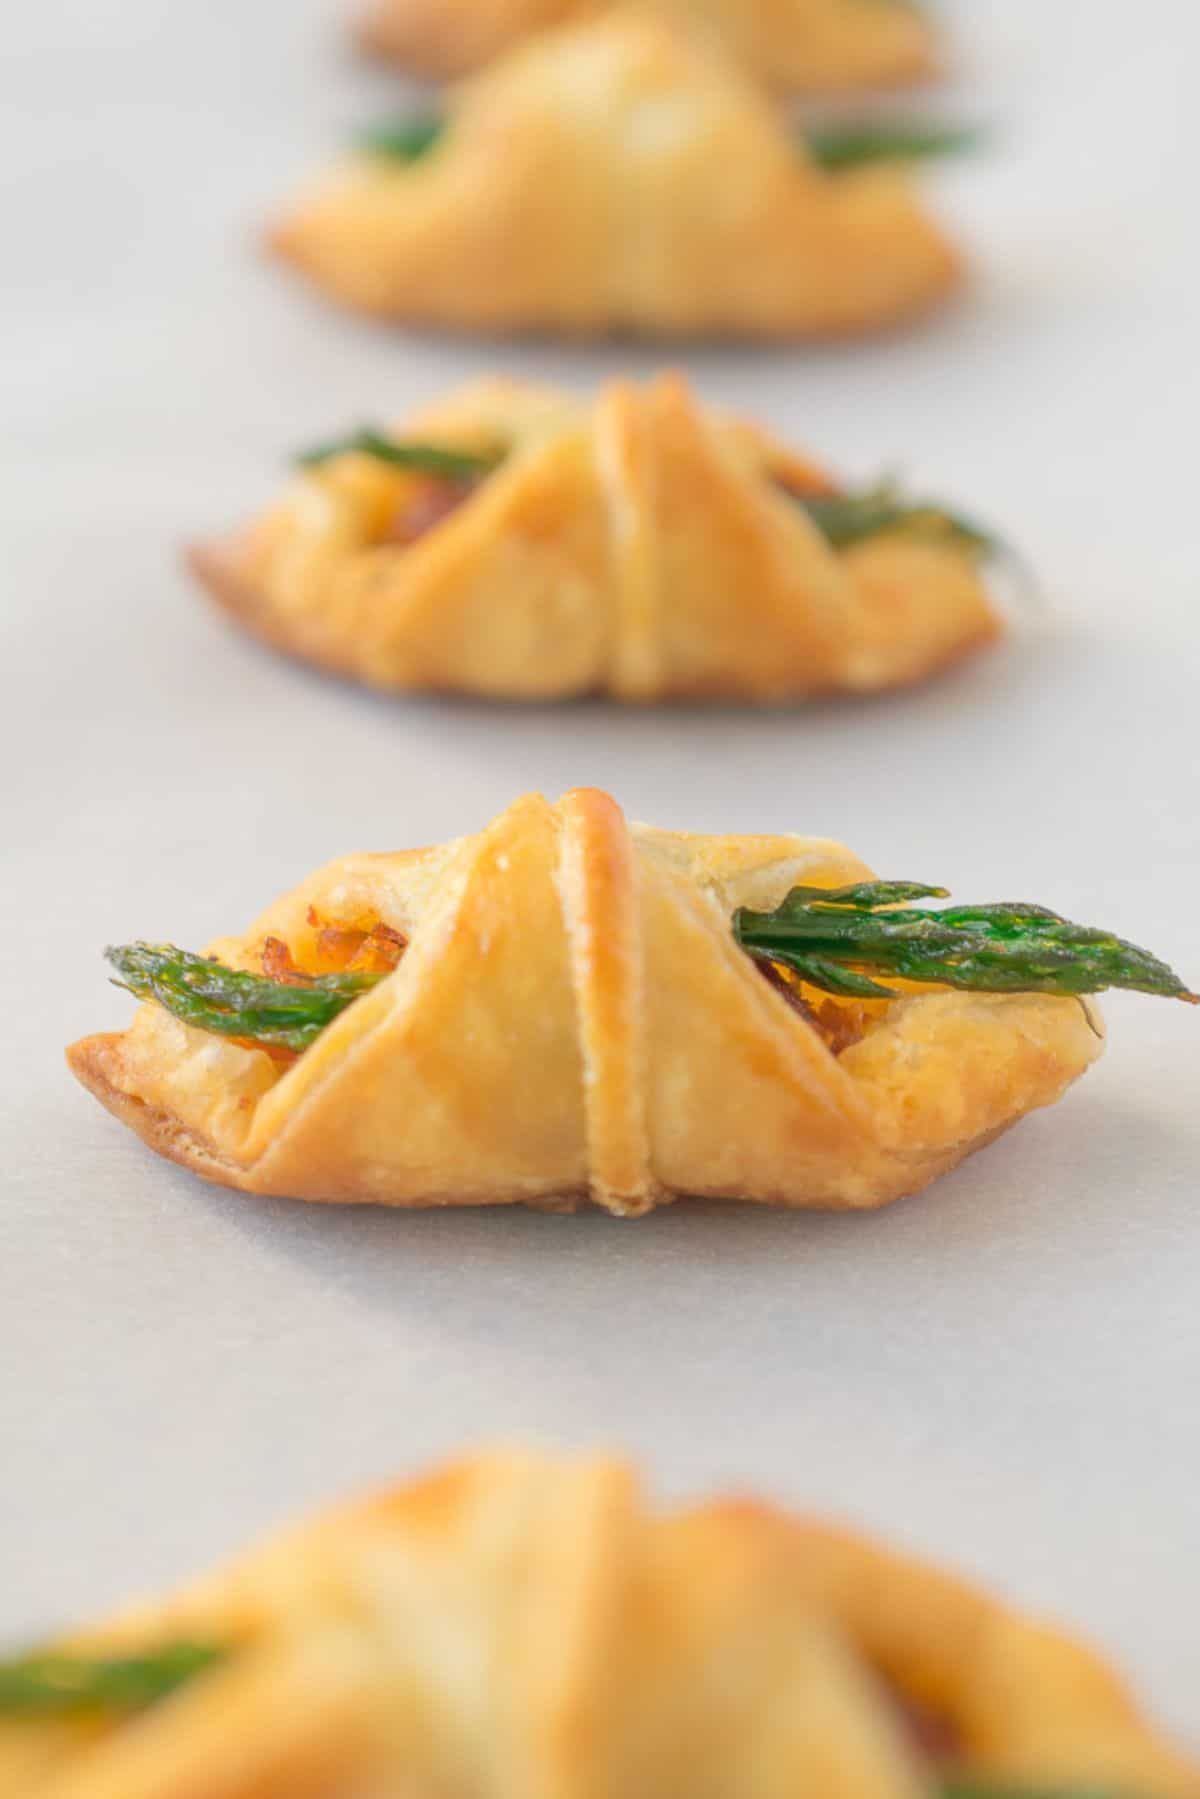 Delicious Puff Pastry Bites with Asparagus and Sun-dried Tomatoes.